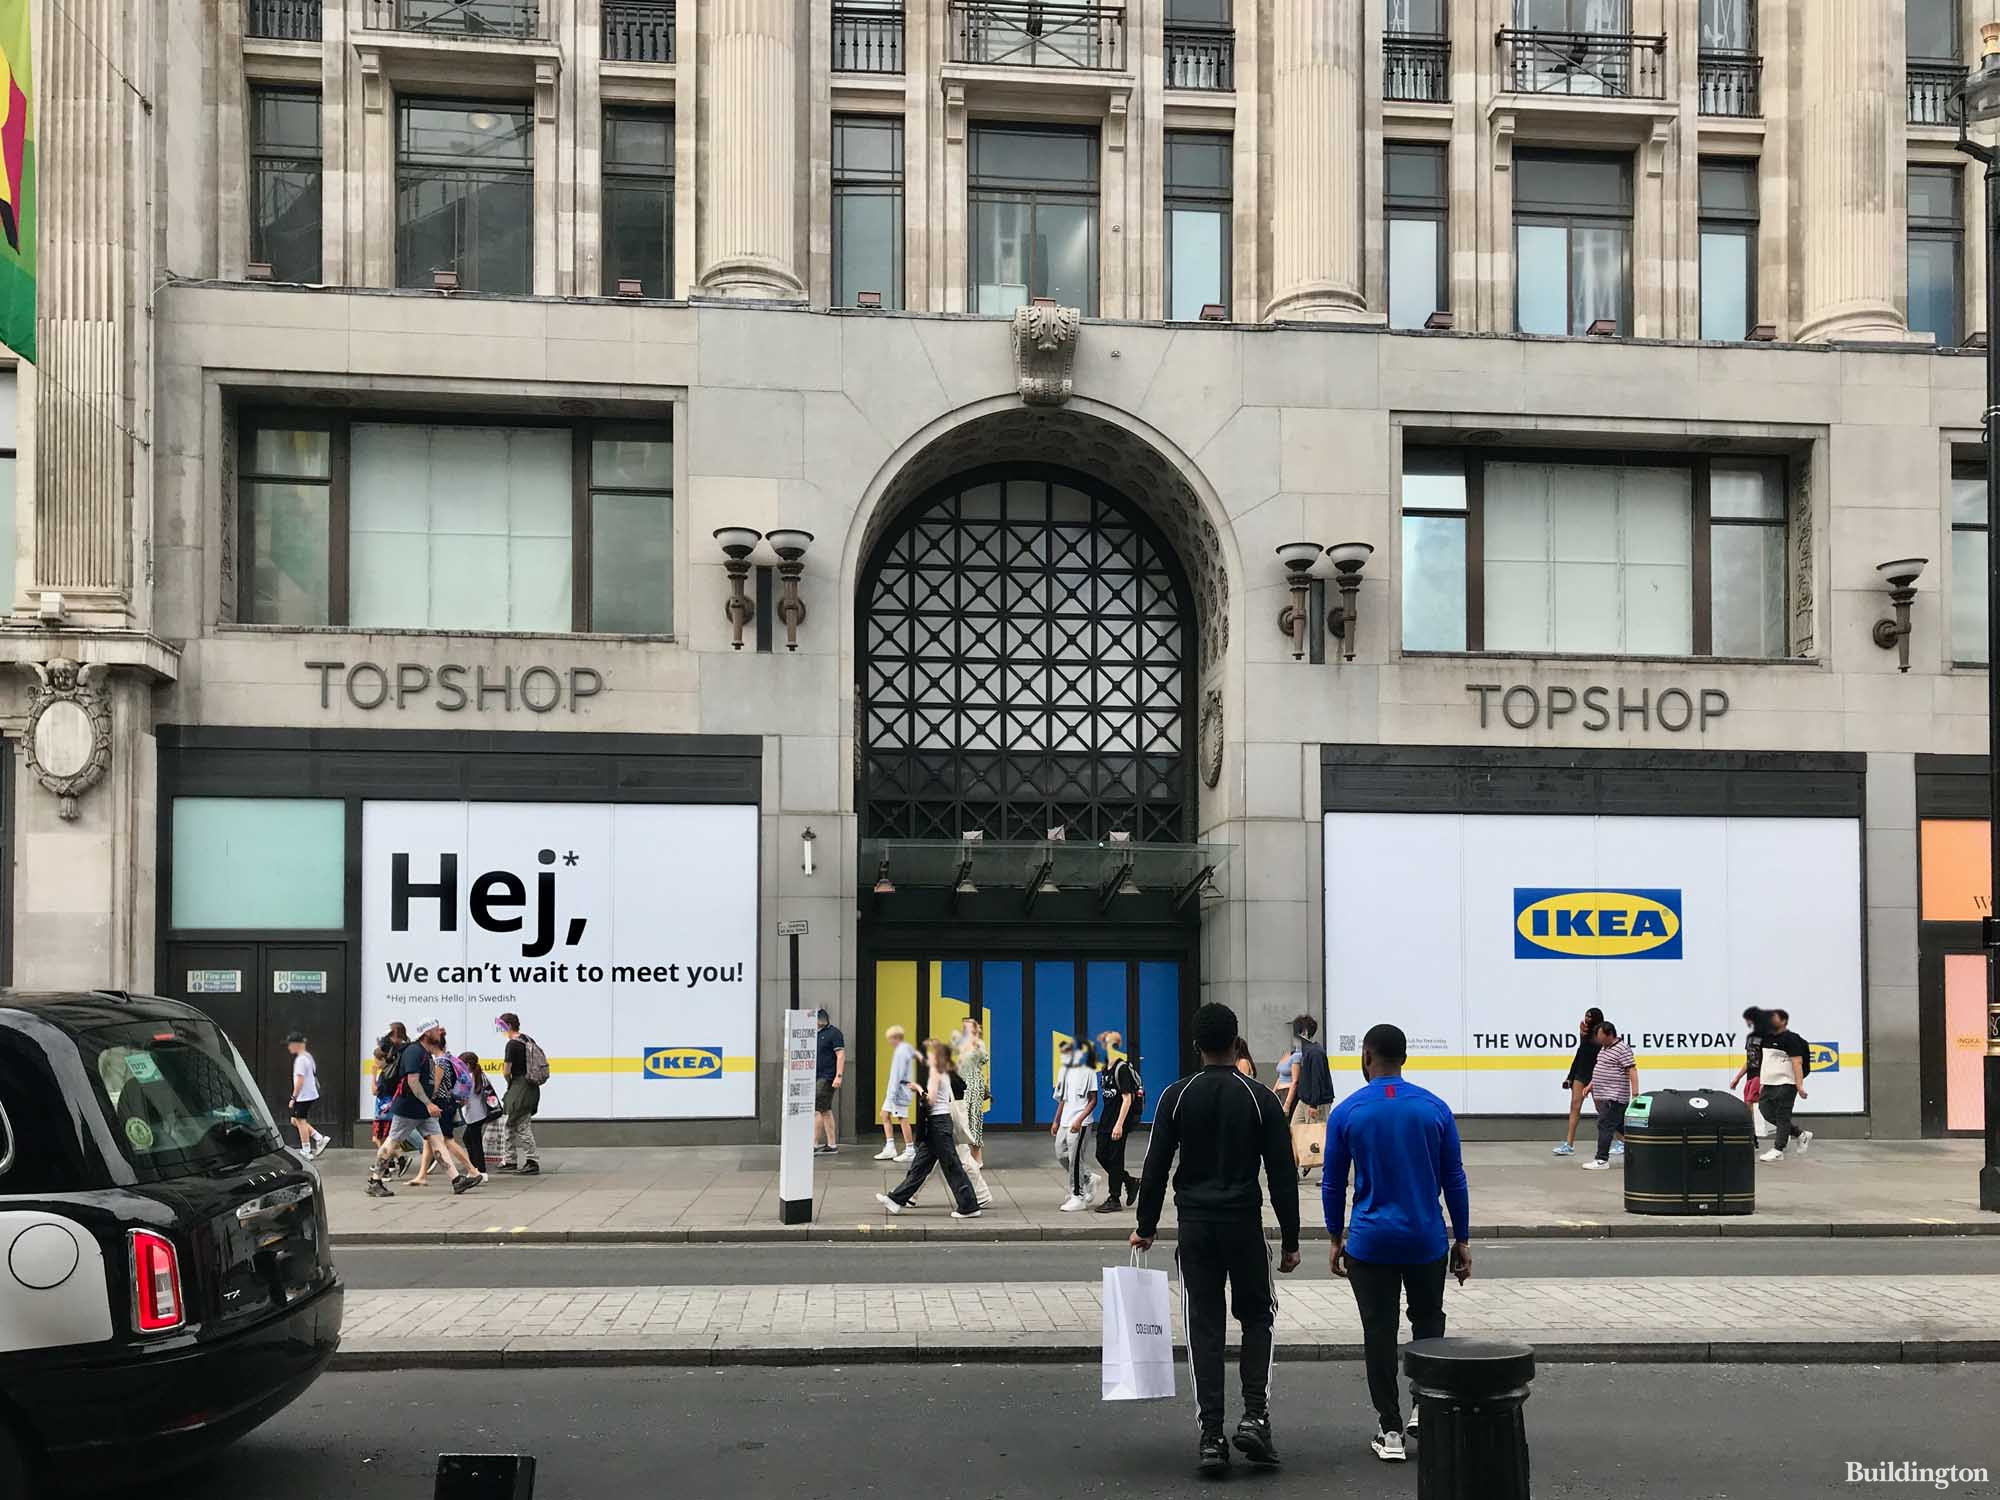 Hej, we can't wait to meet you. IKEA's new store will open at Oxford Circus in Autumn 2023